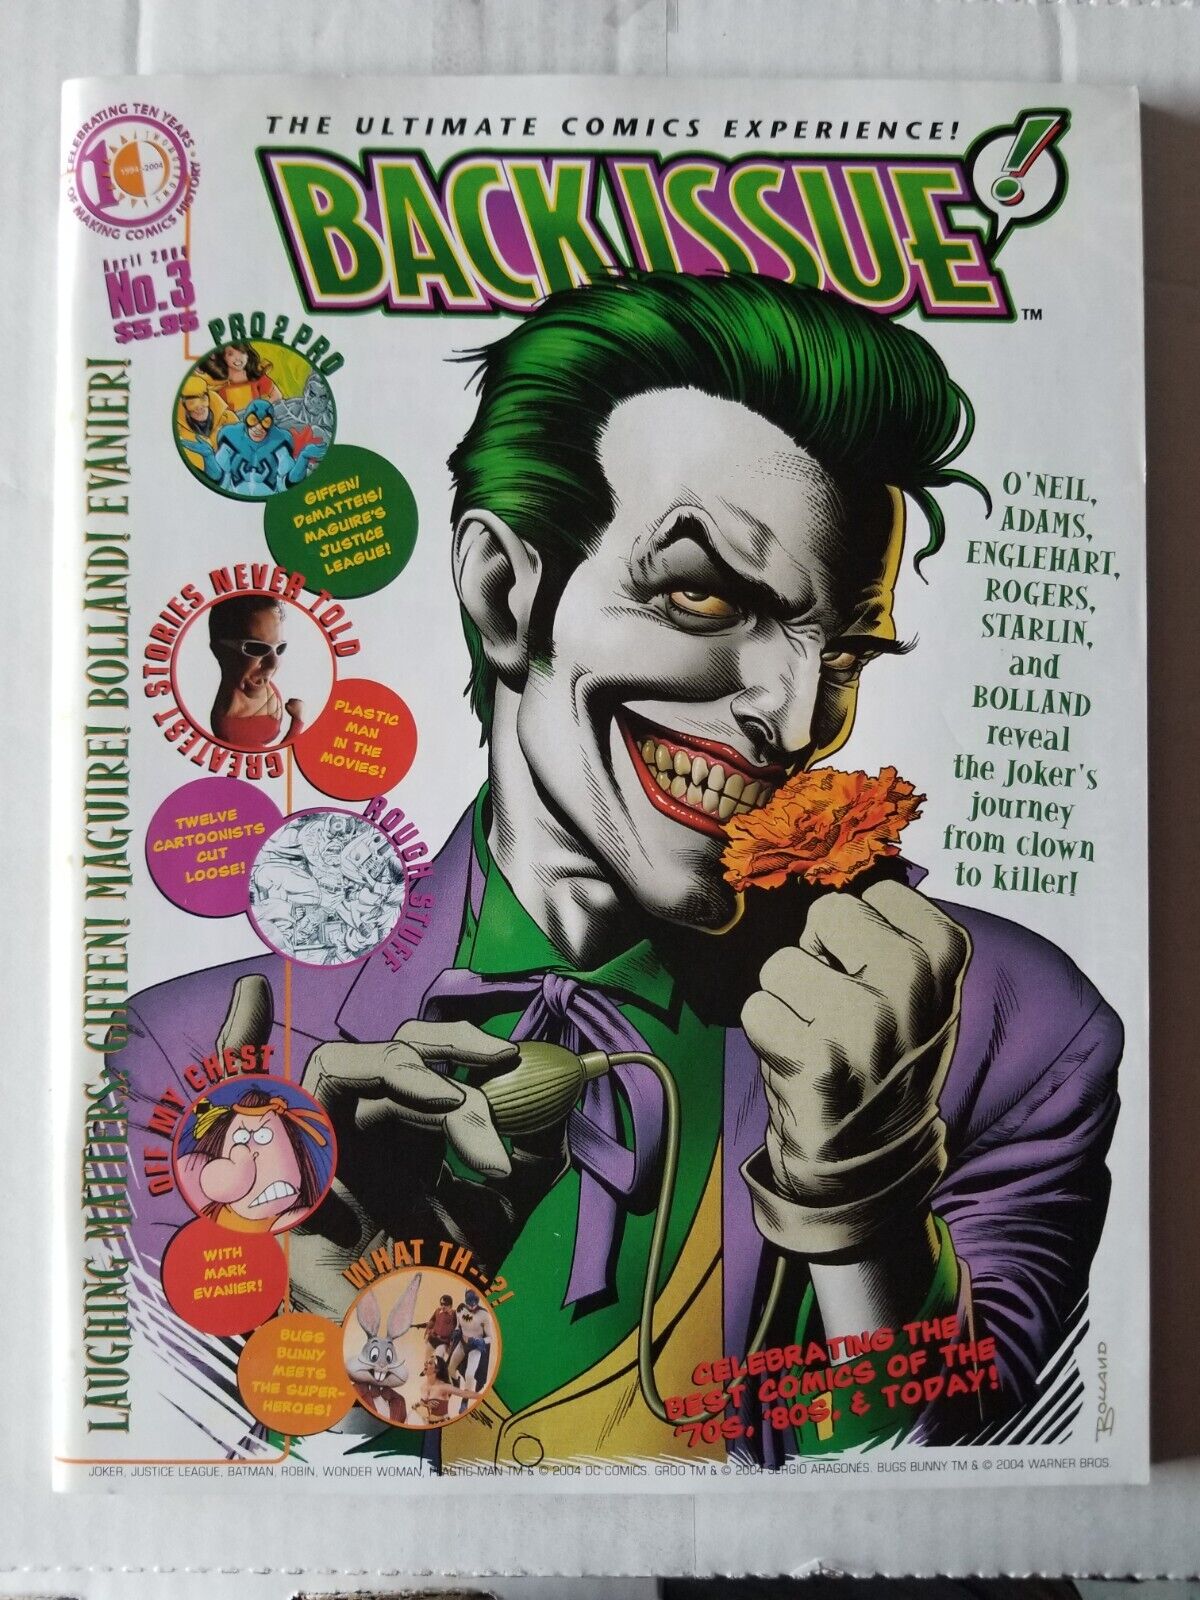 Back Issue #3 Magazine Bolland Joker Cover (TwoMorrows)